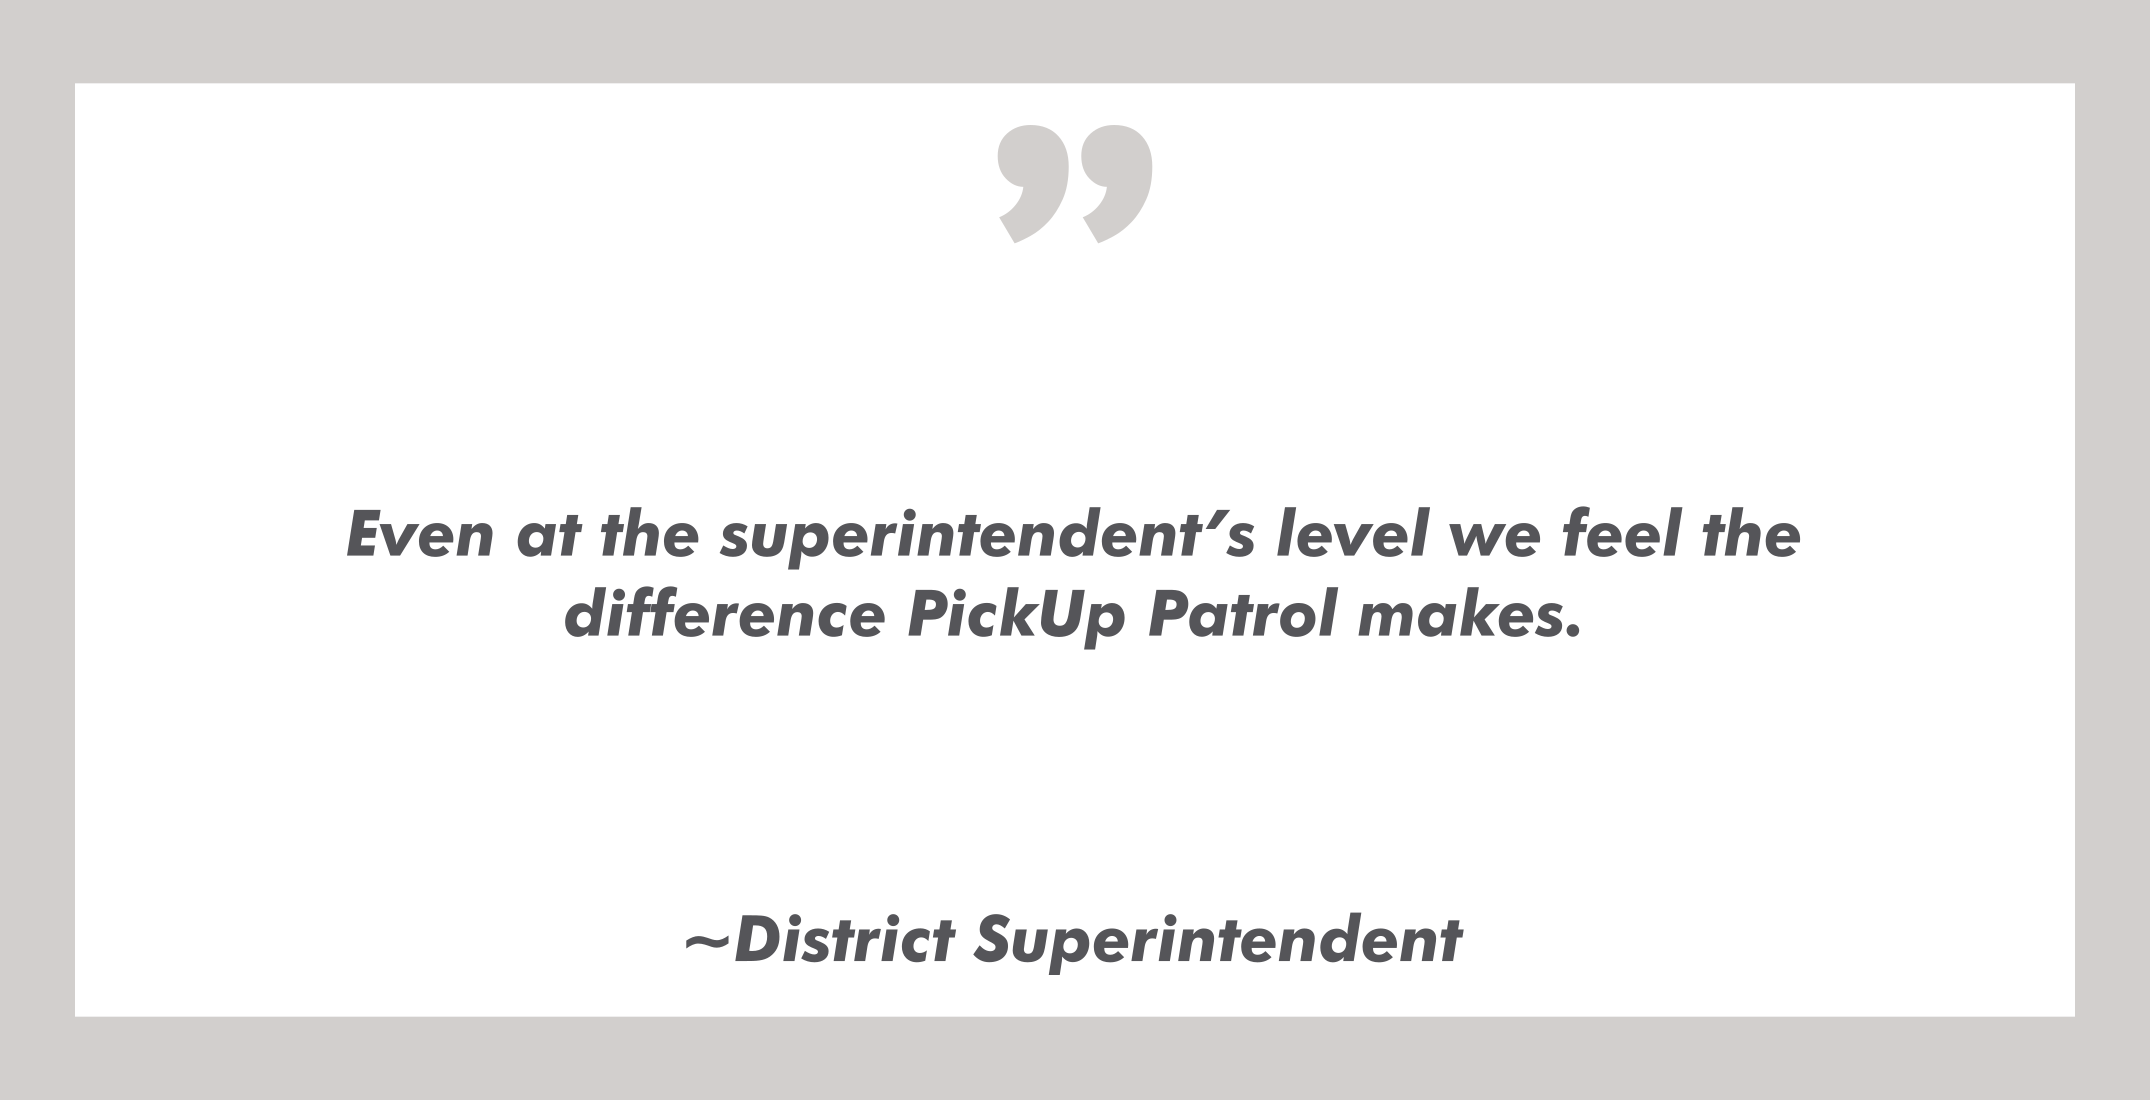 PickUp Patrol student dismissal software testimonial from district superintendent